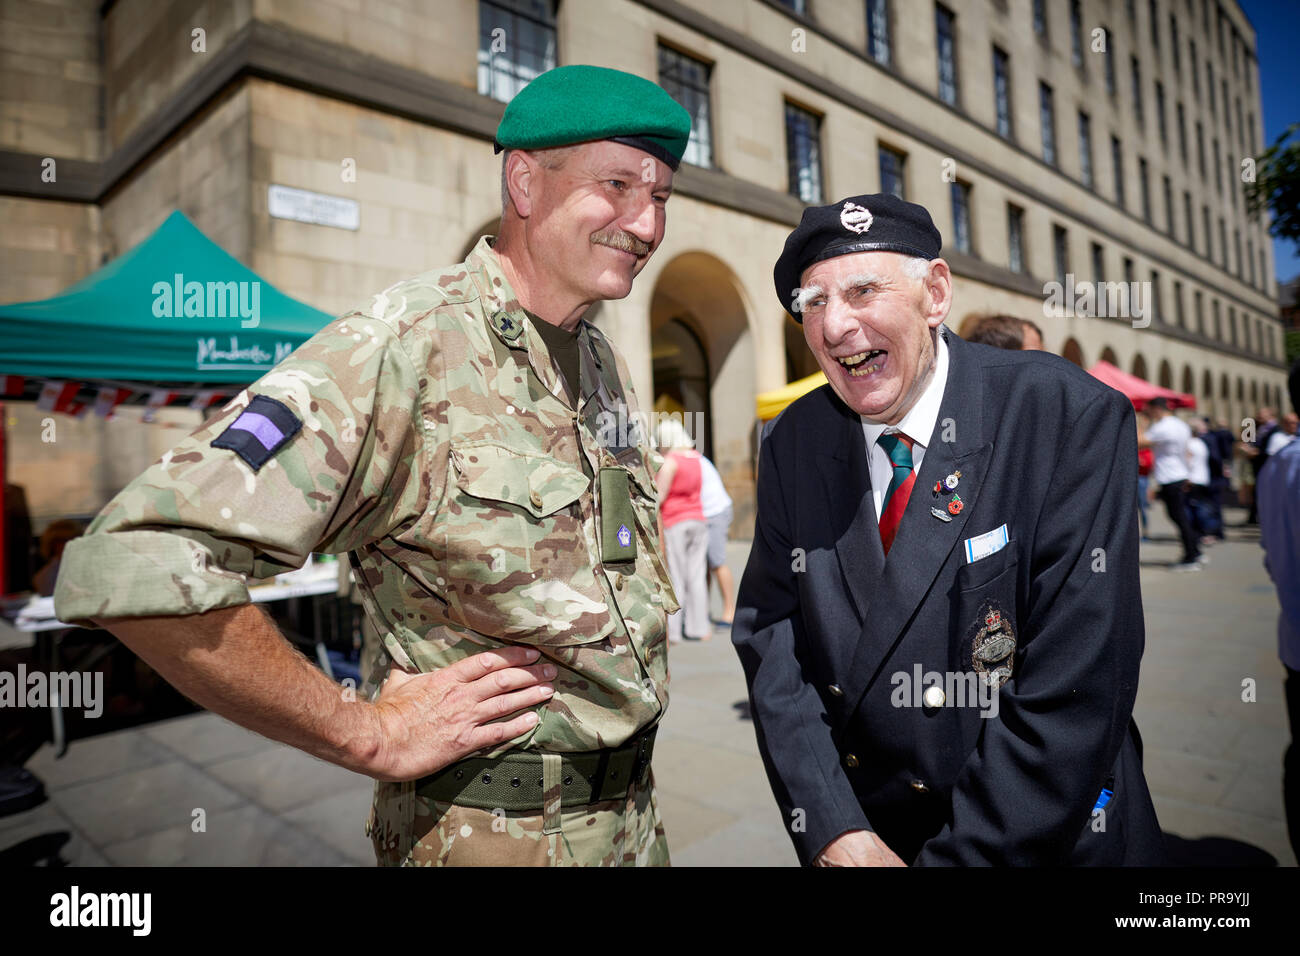 Manchester celebrates Armed forces Day in Peters Square   Jack Wilson aged 88 from Sale chatting with serving Mile Newman 6MI Stock Photo